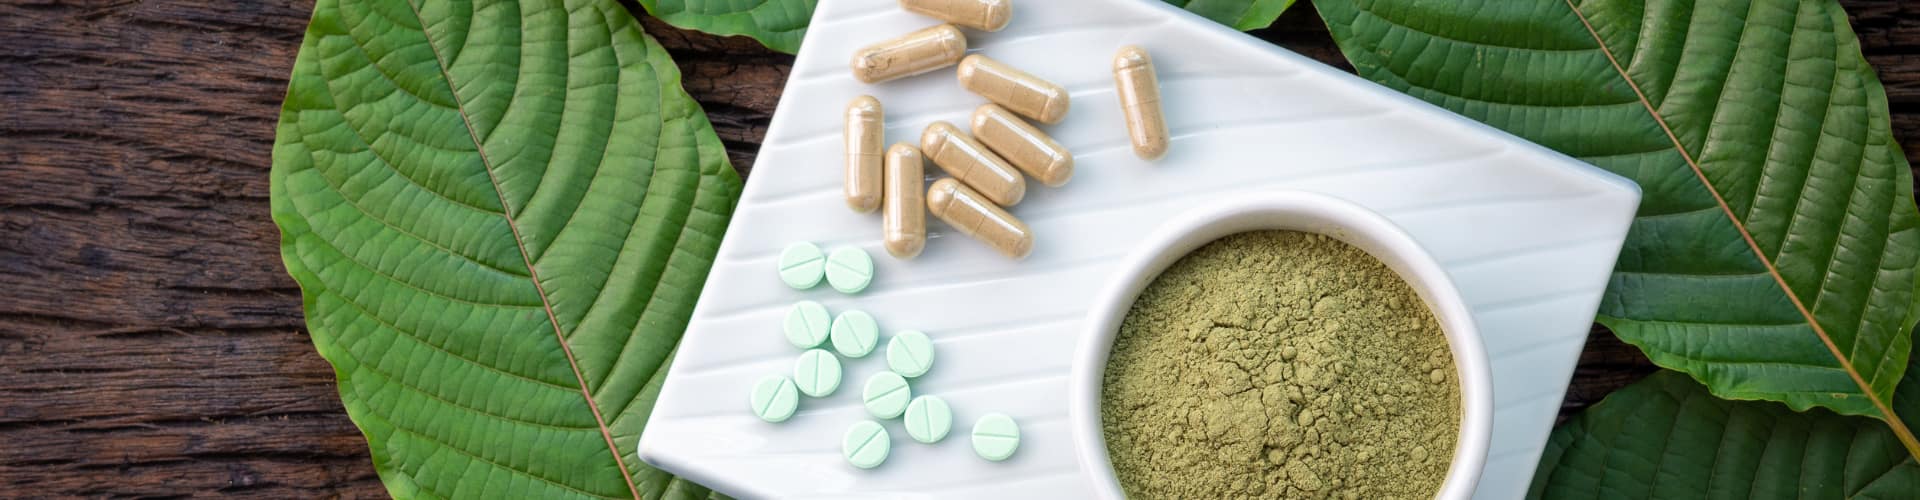 How to Take Kratom: Learn About the Most Popular Methods